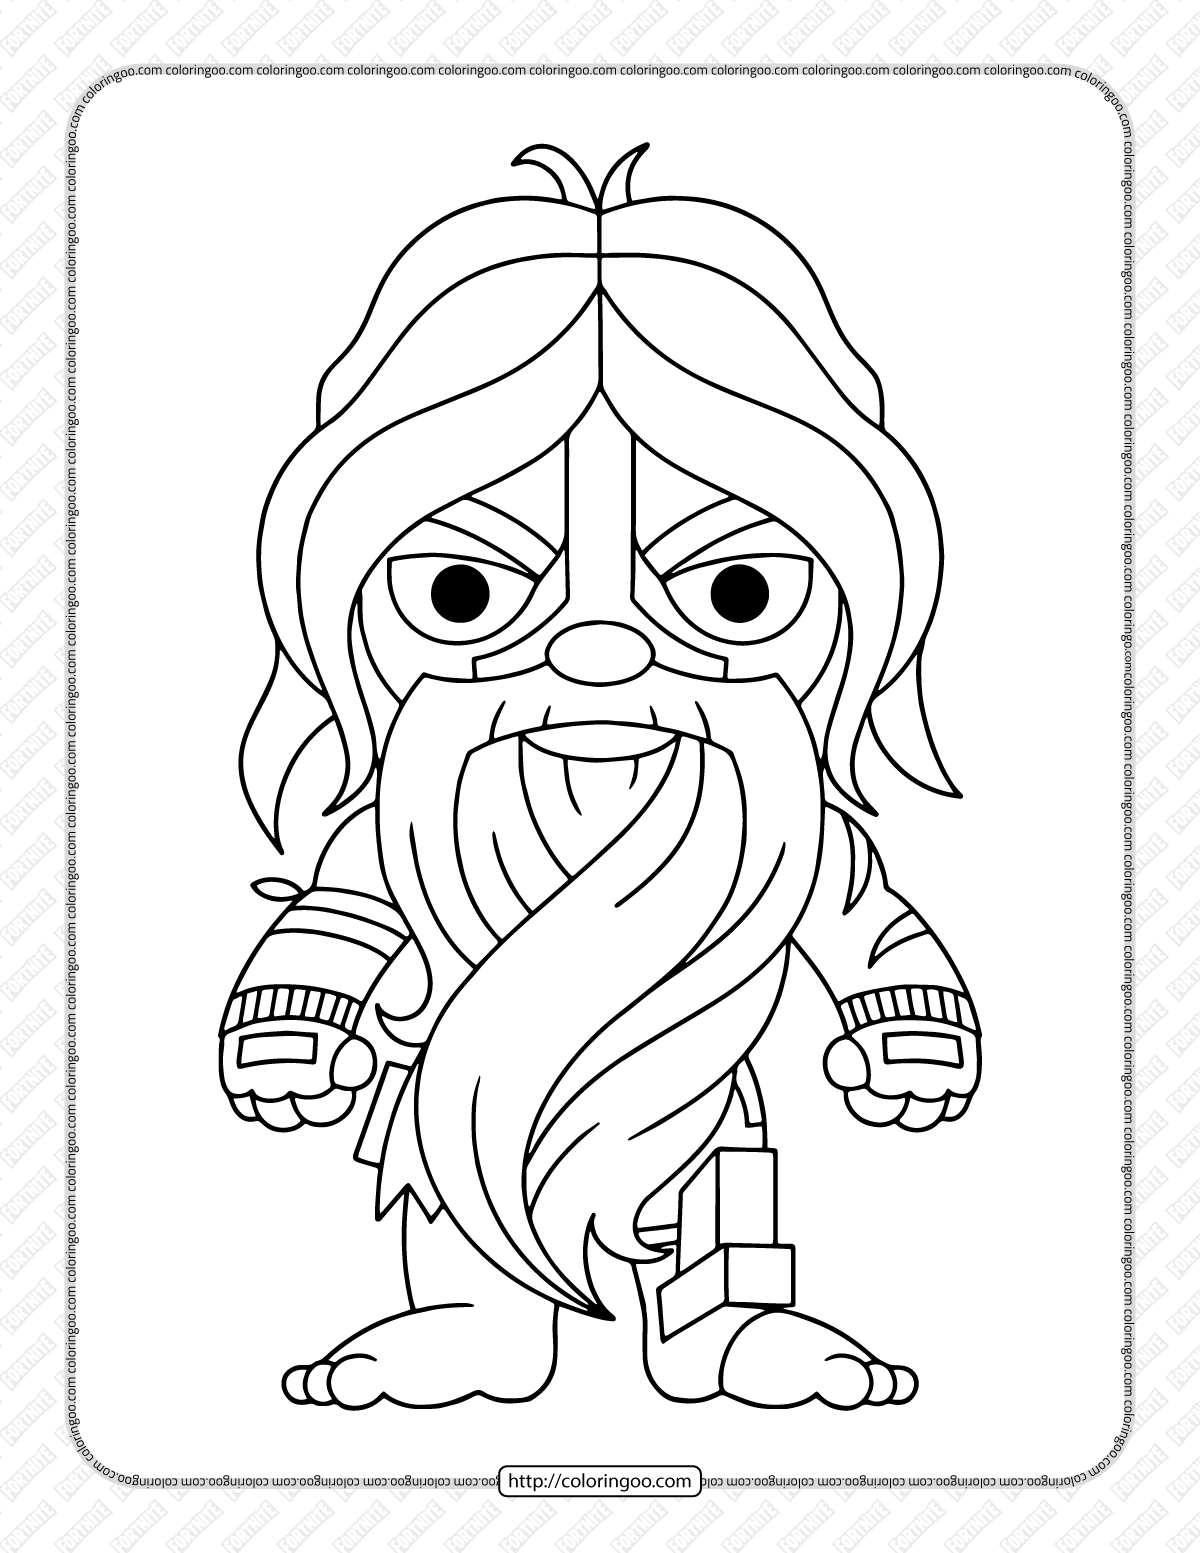 chibi fortnite coloring pages 14